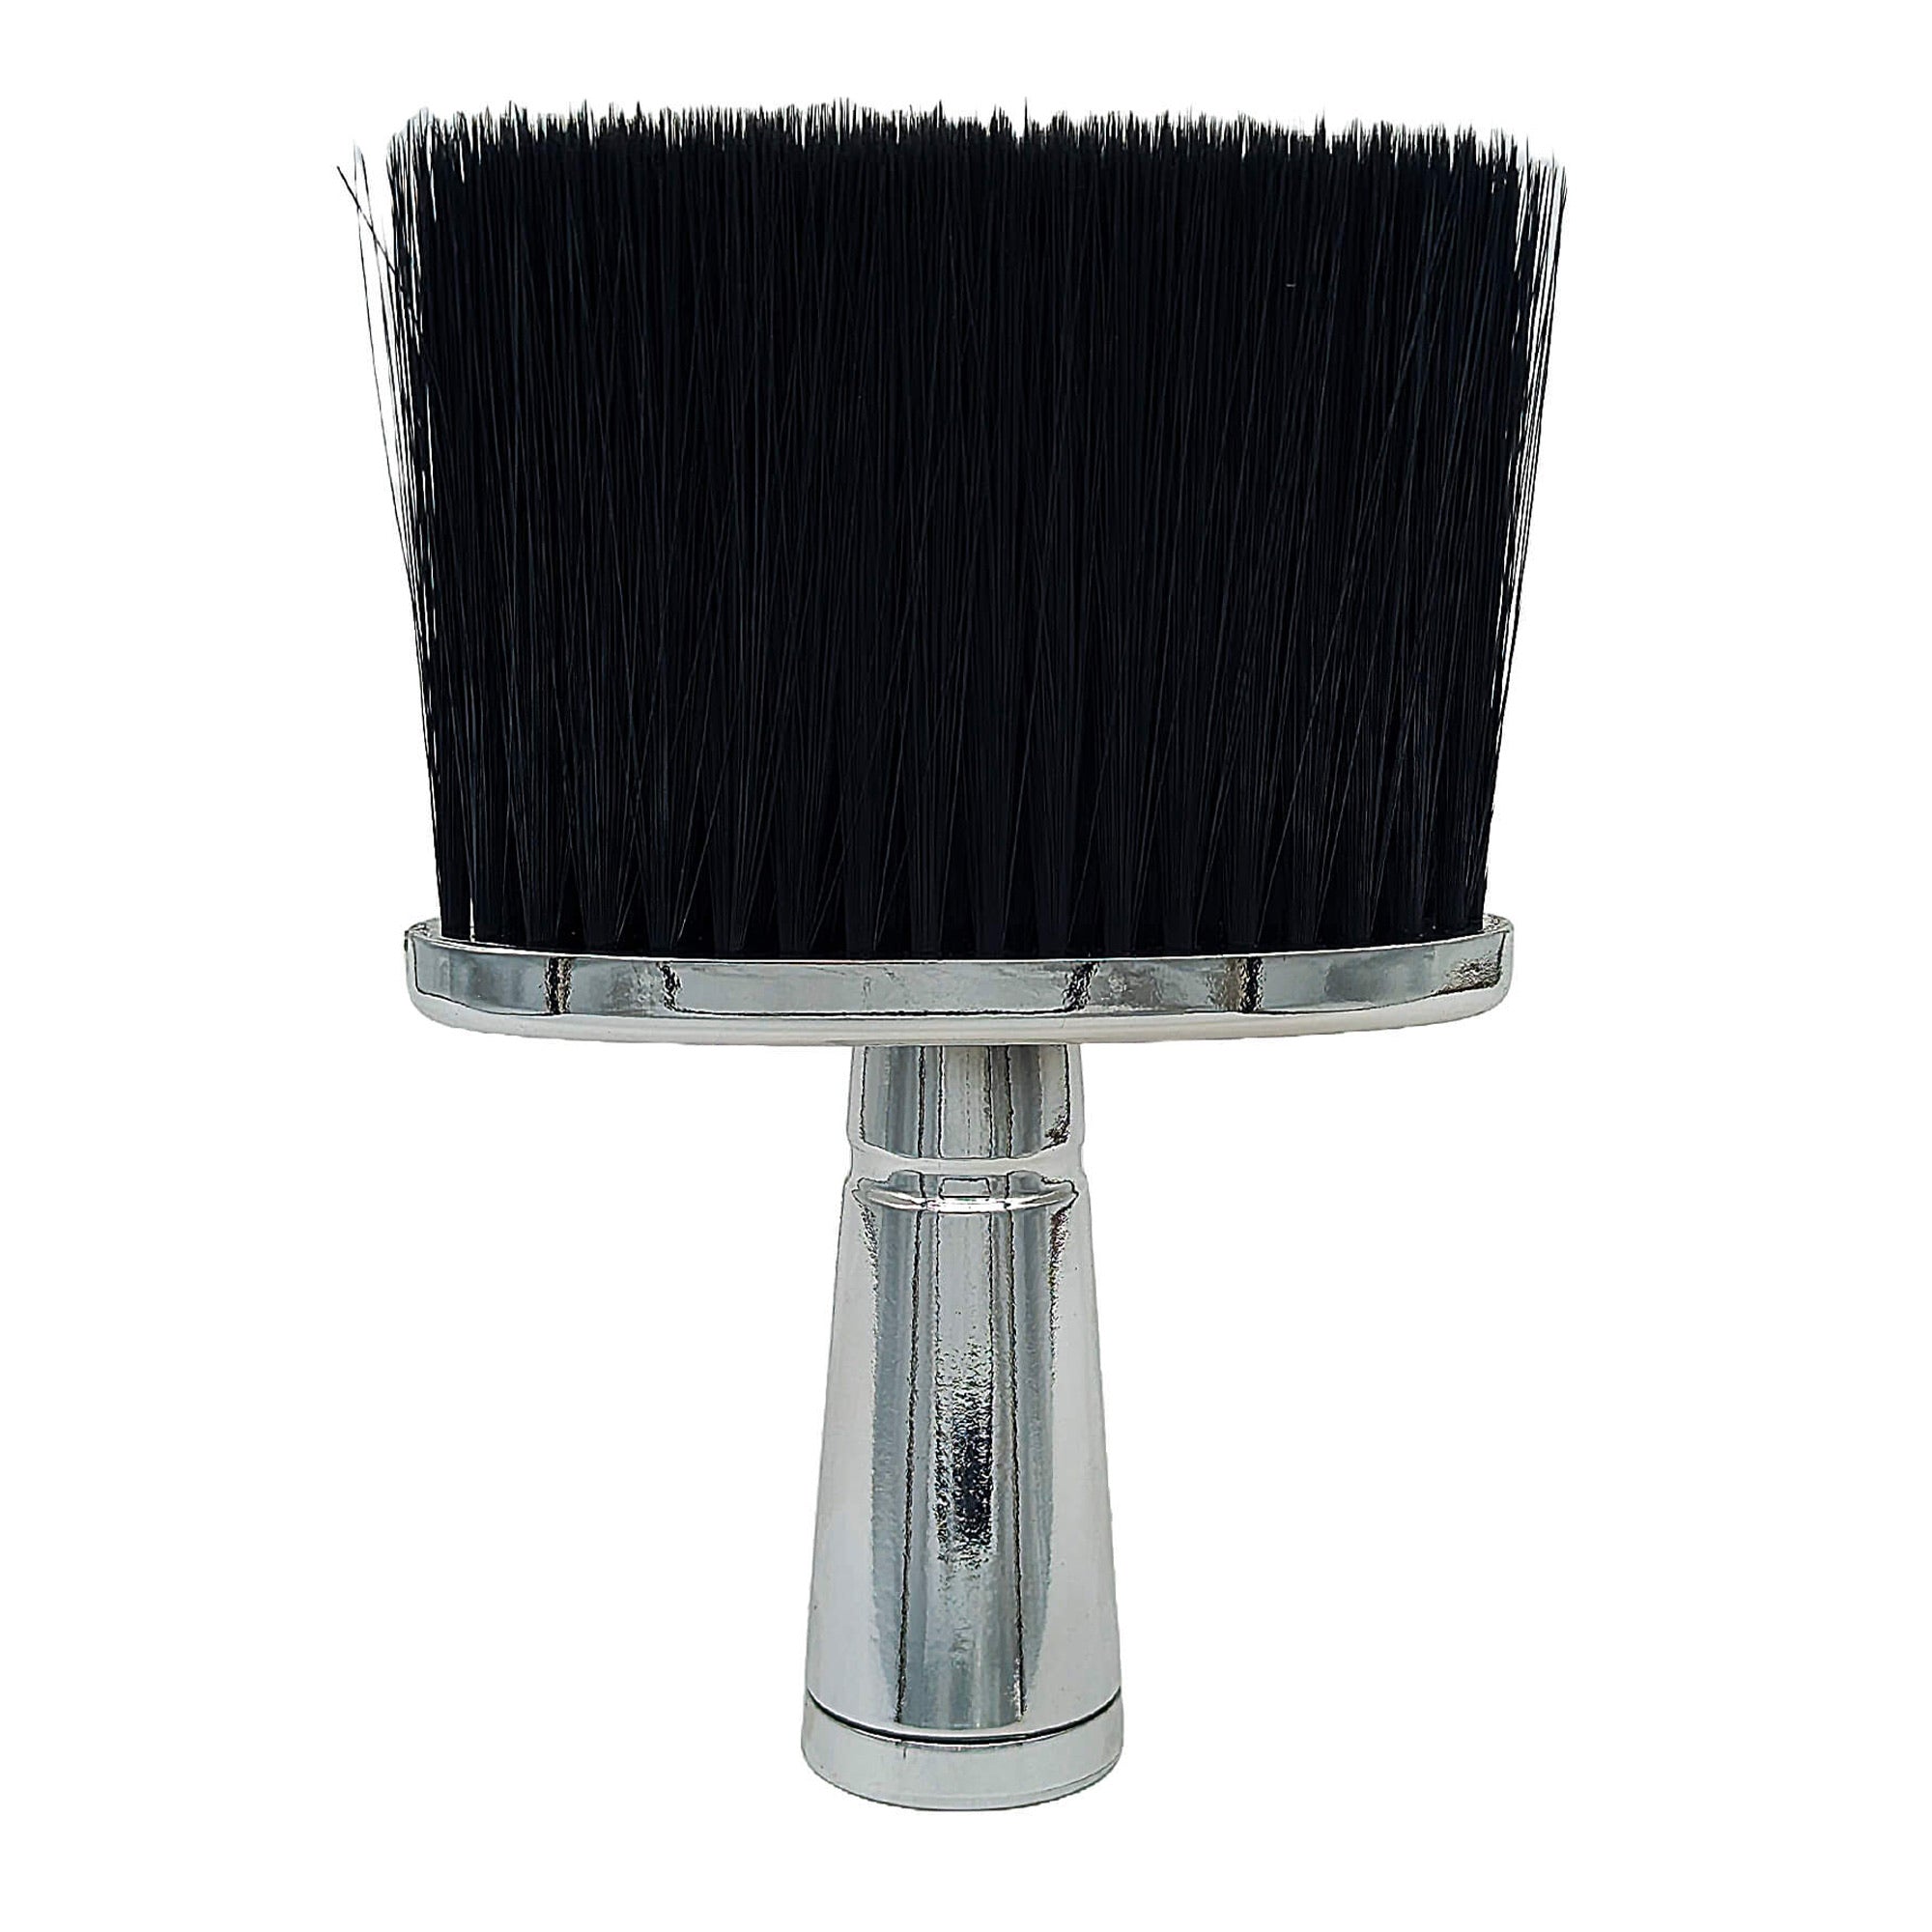 Eson - Neck Duster Brush Ultra-Soft Comfort During Use 15x10cm (Silver)